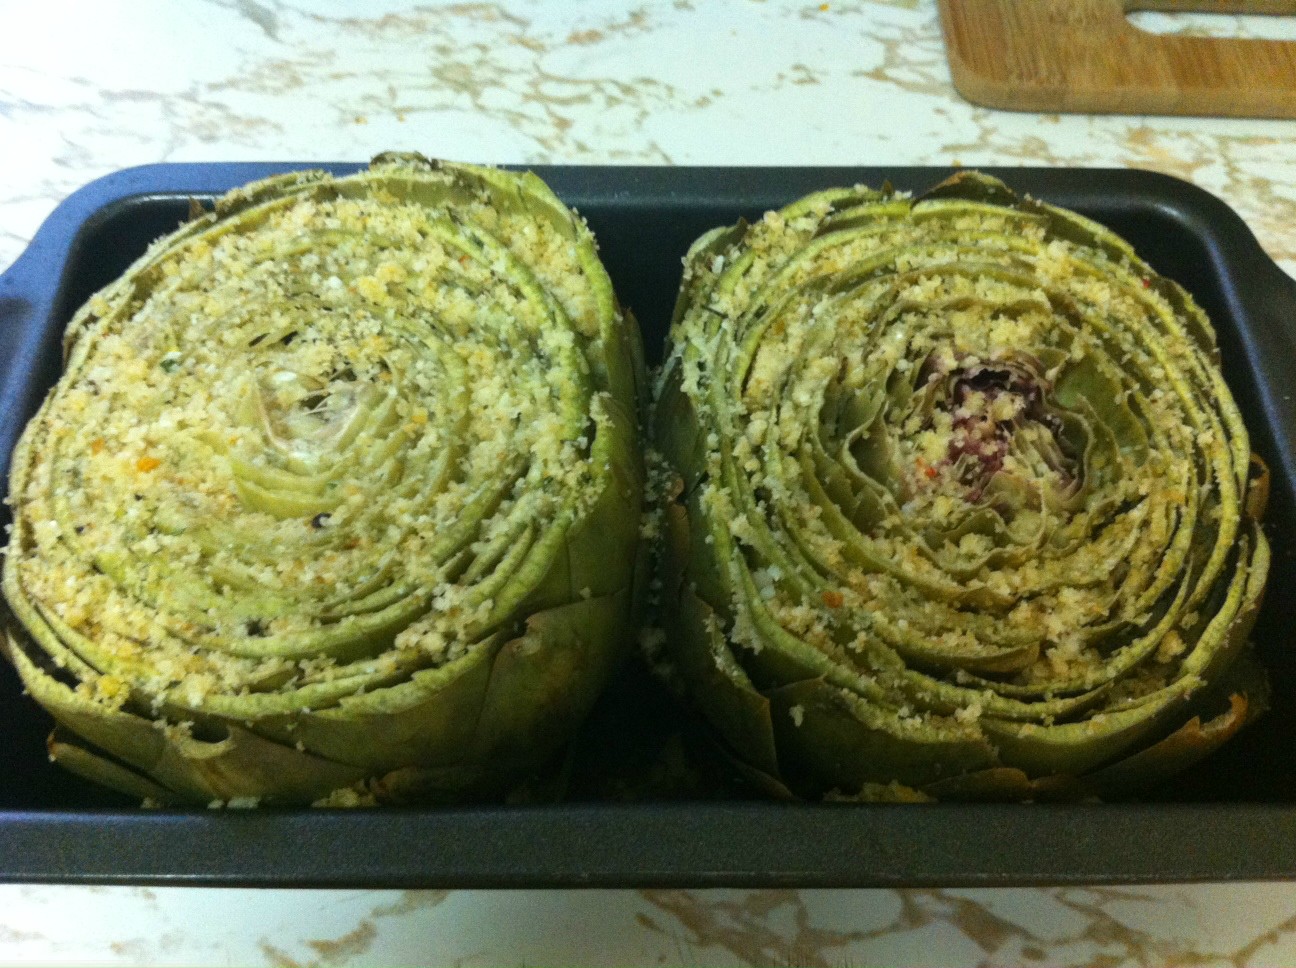 Artichokes filled with stuffing between leaves